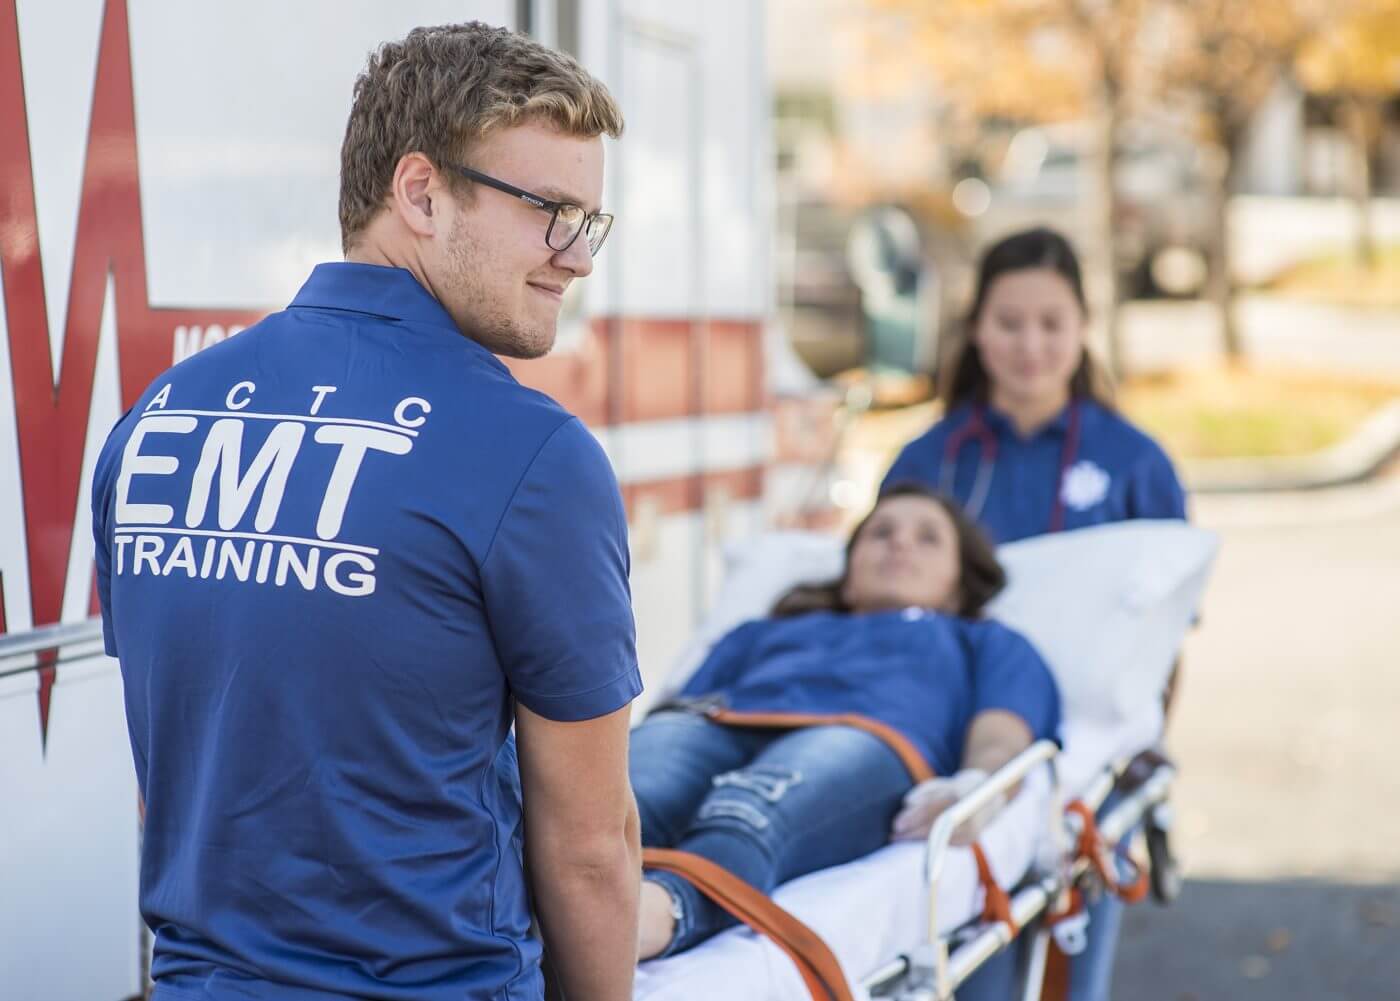 Three students learning how to use a stretcher during EMT training.